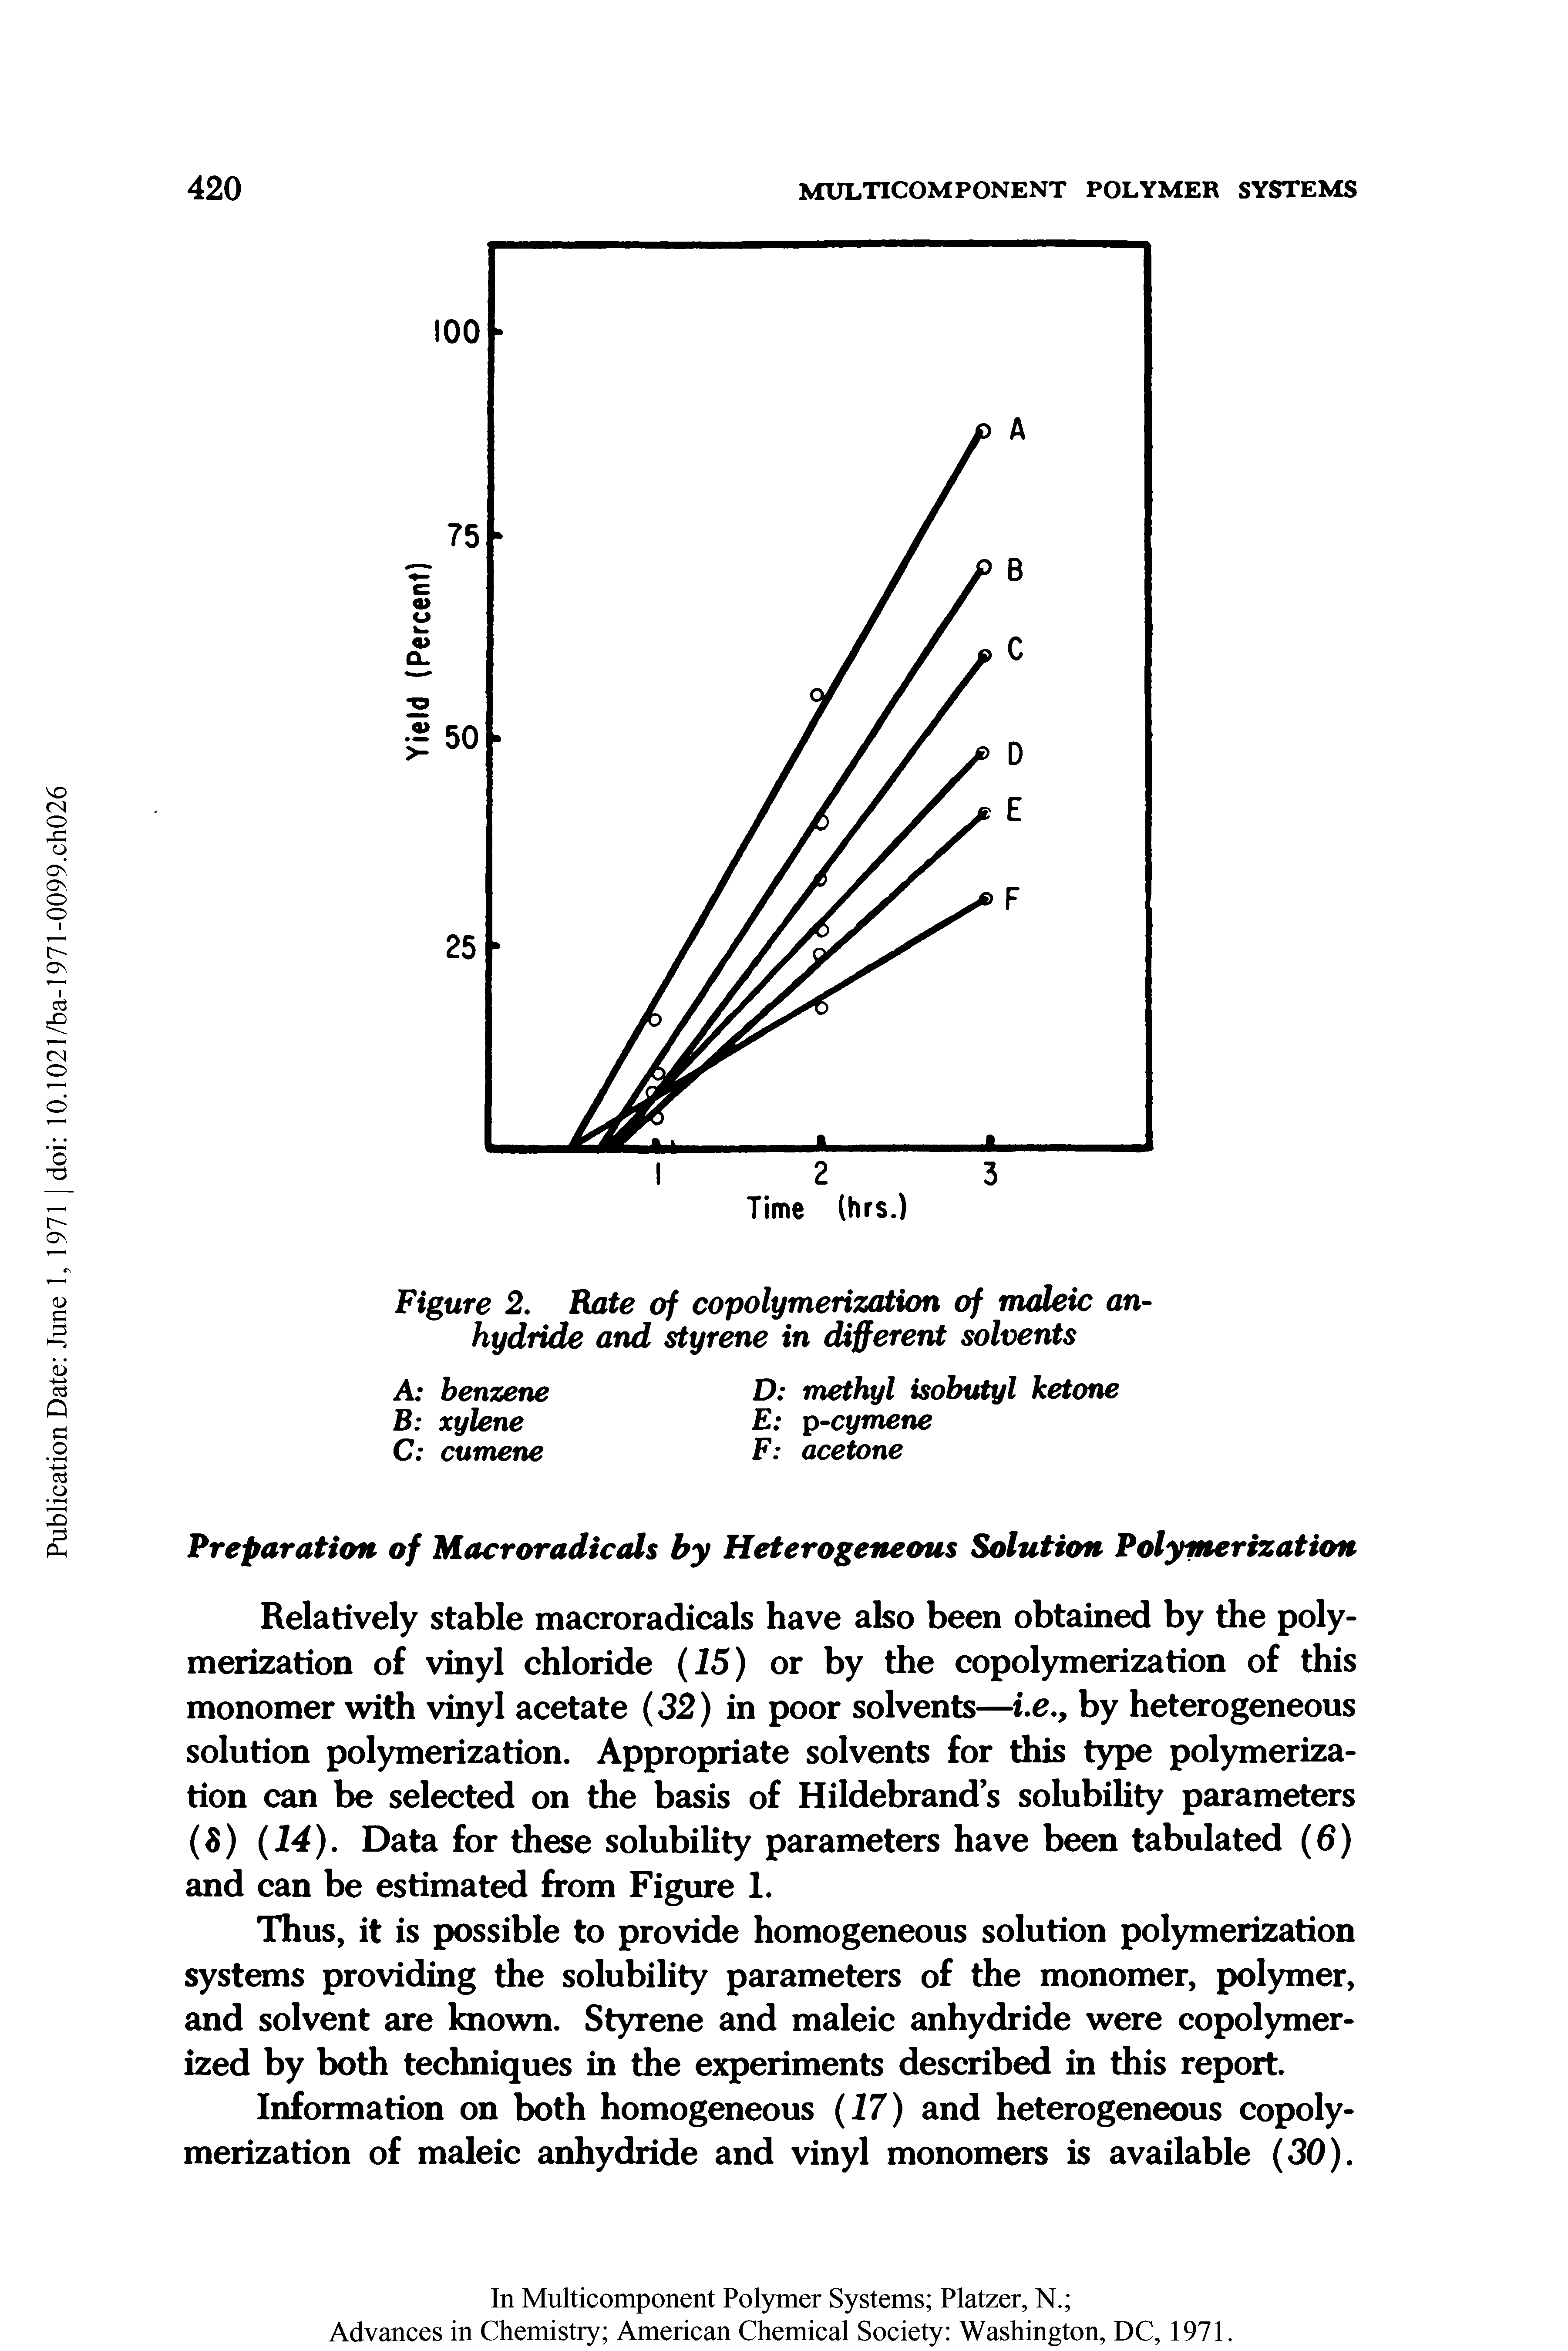 Figure 2. Rate of copolymerization of maleic anhydride and styrene in different solvents...